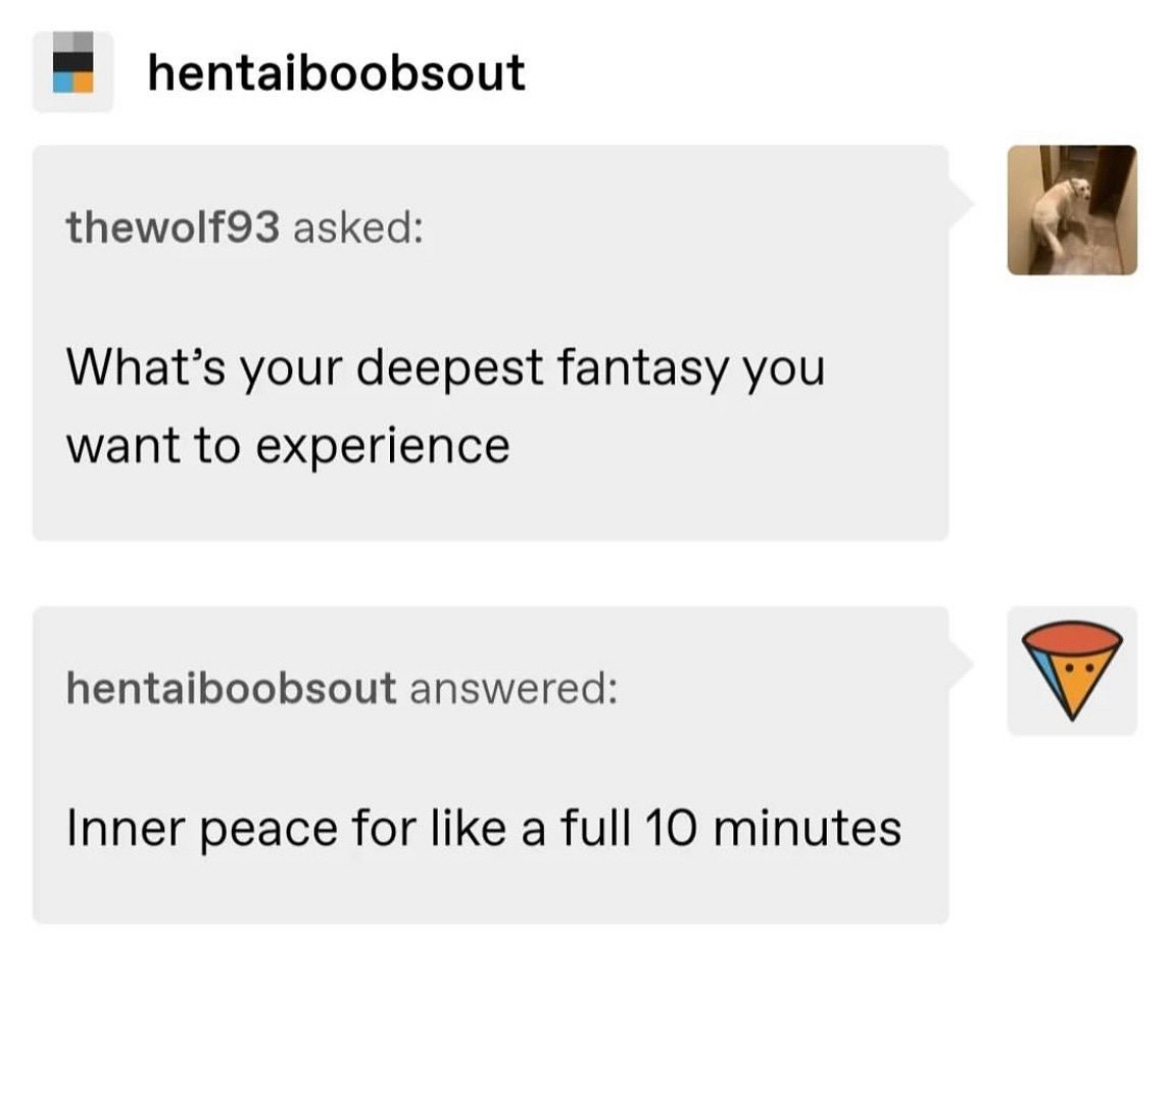 tumblr post q&a, q: what's your deepest fantasy you want to experience. a: inner peace for like a full 10 minutes